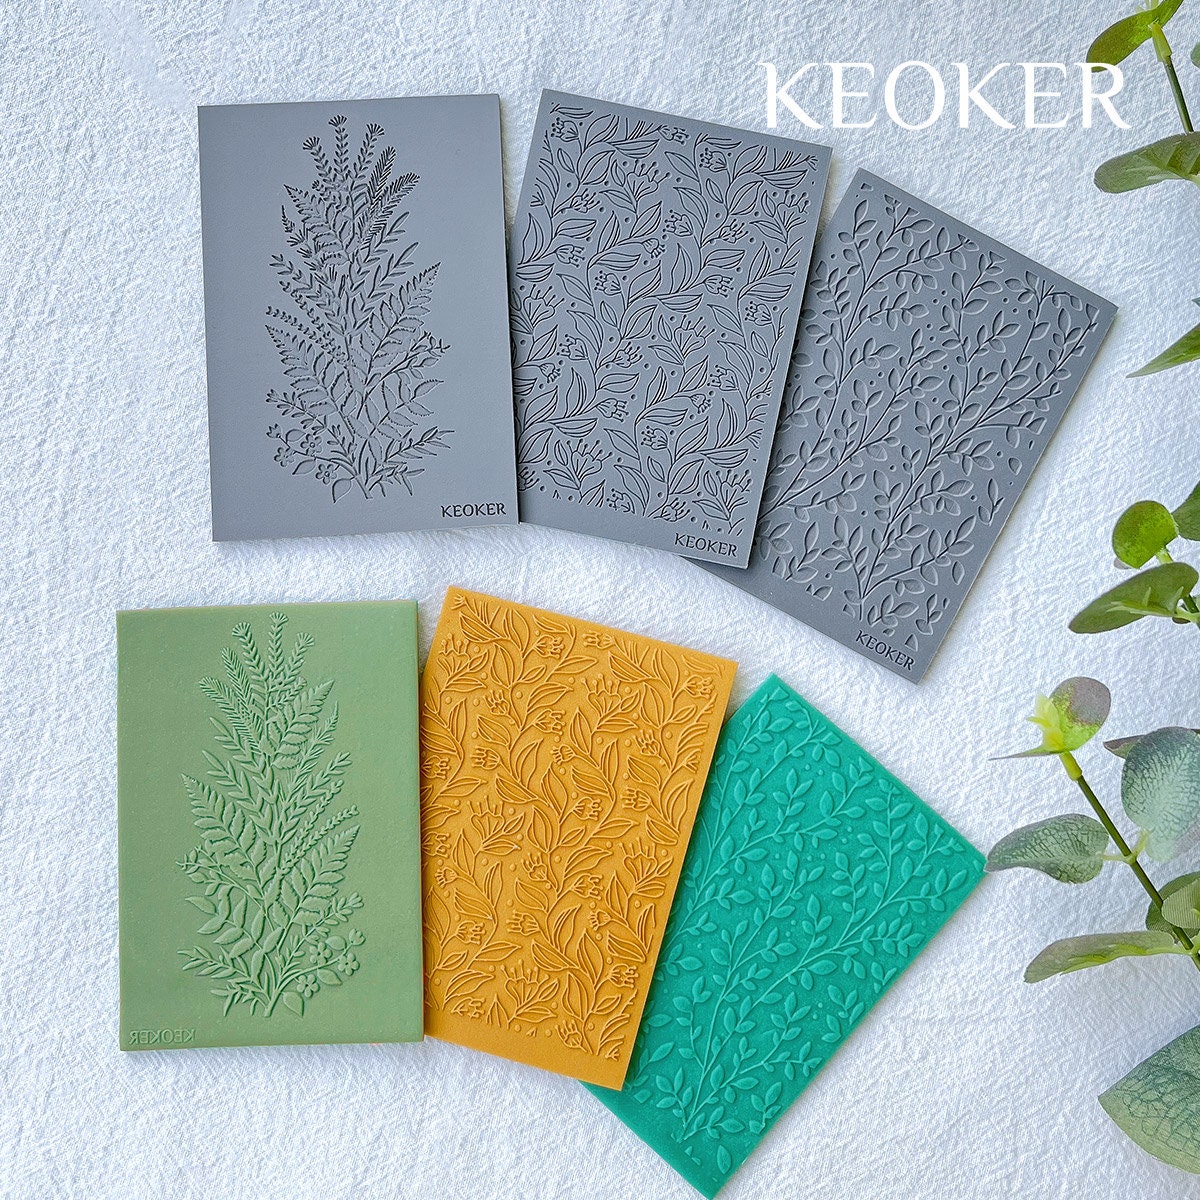 KEOKER Polymer Clay Texture Sheets Set, Clay Earring Molds for